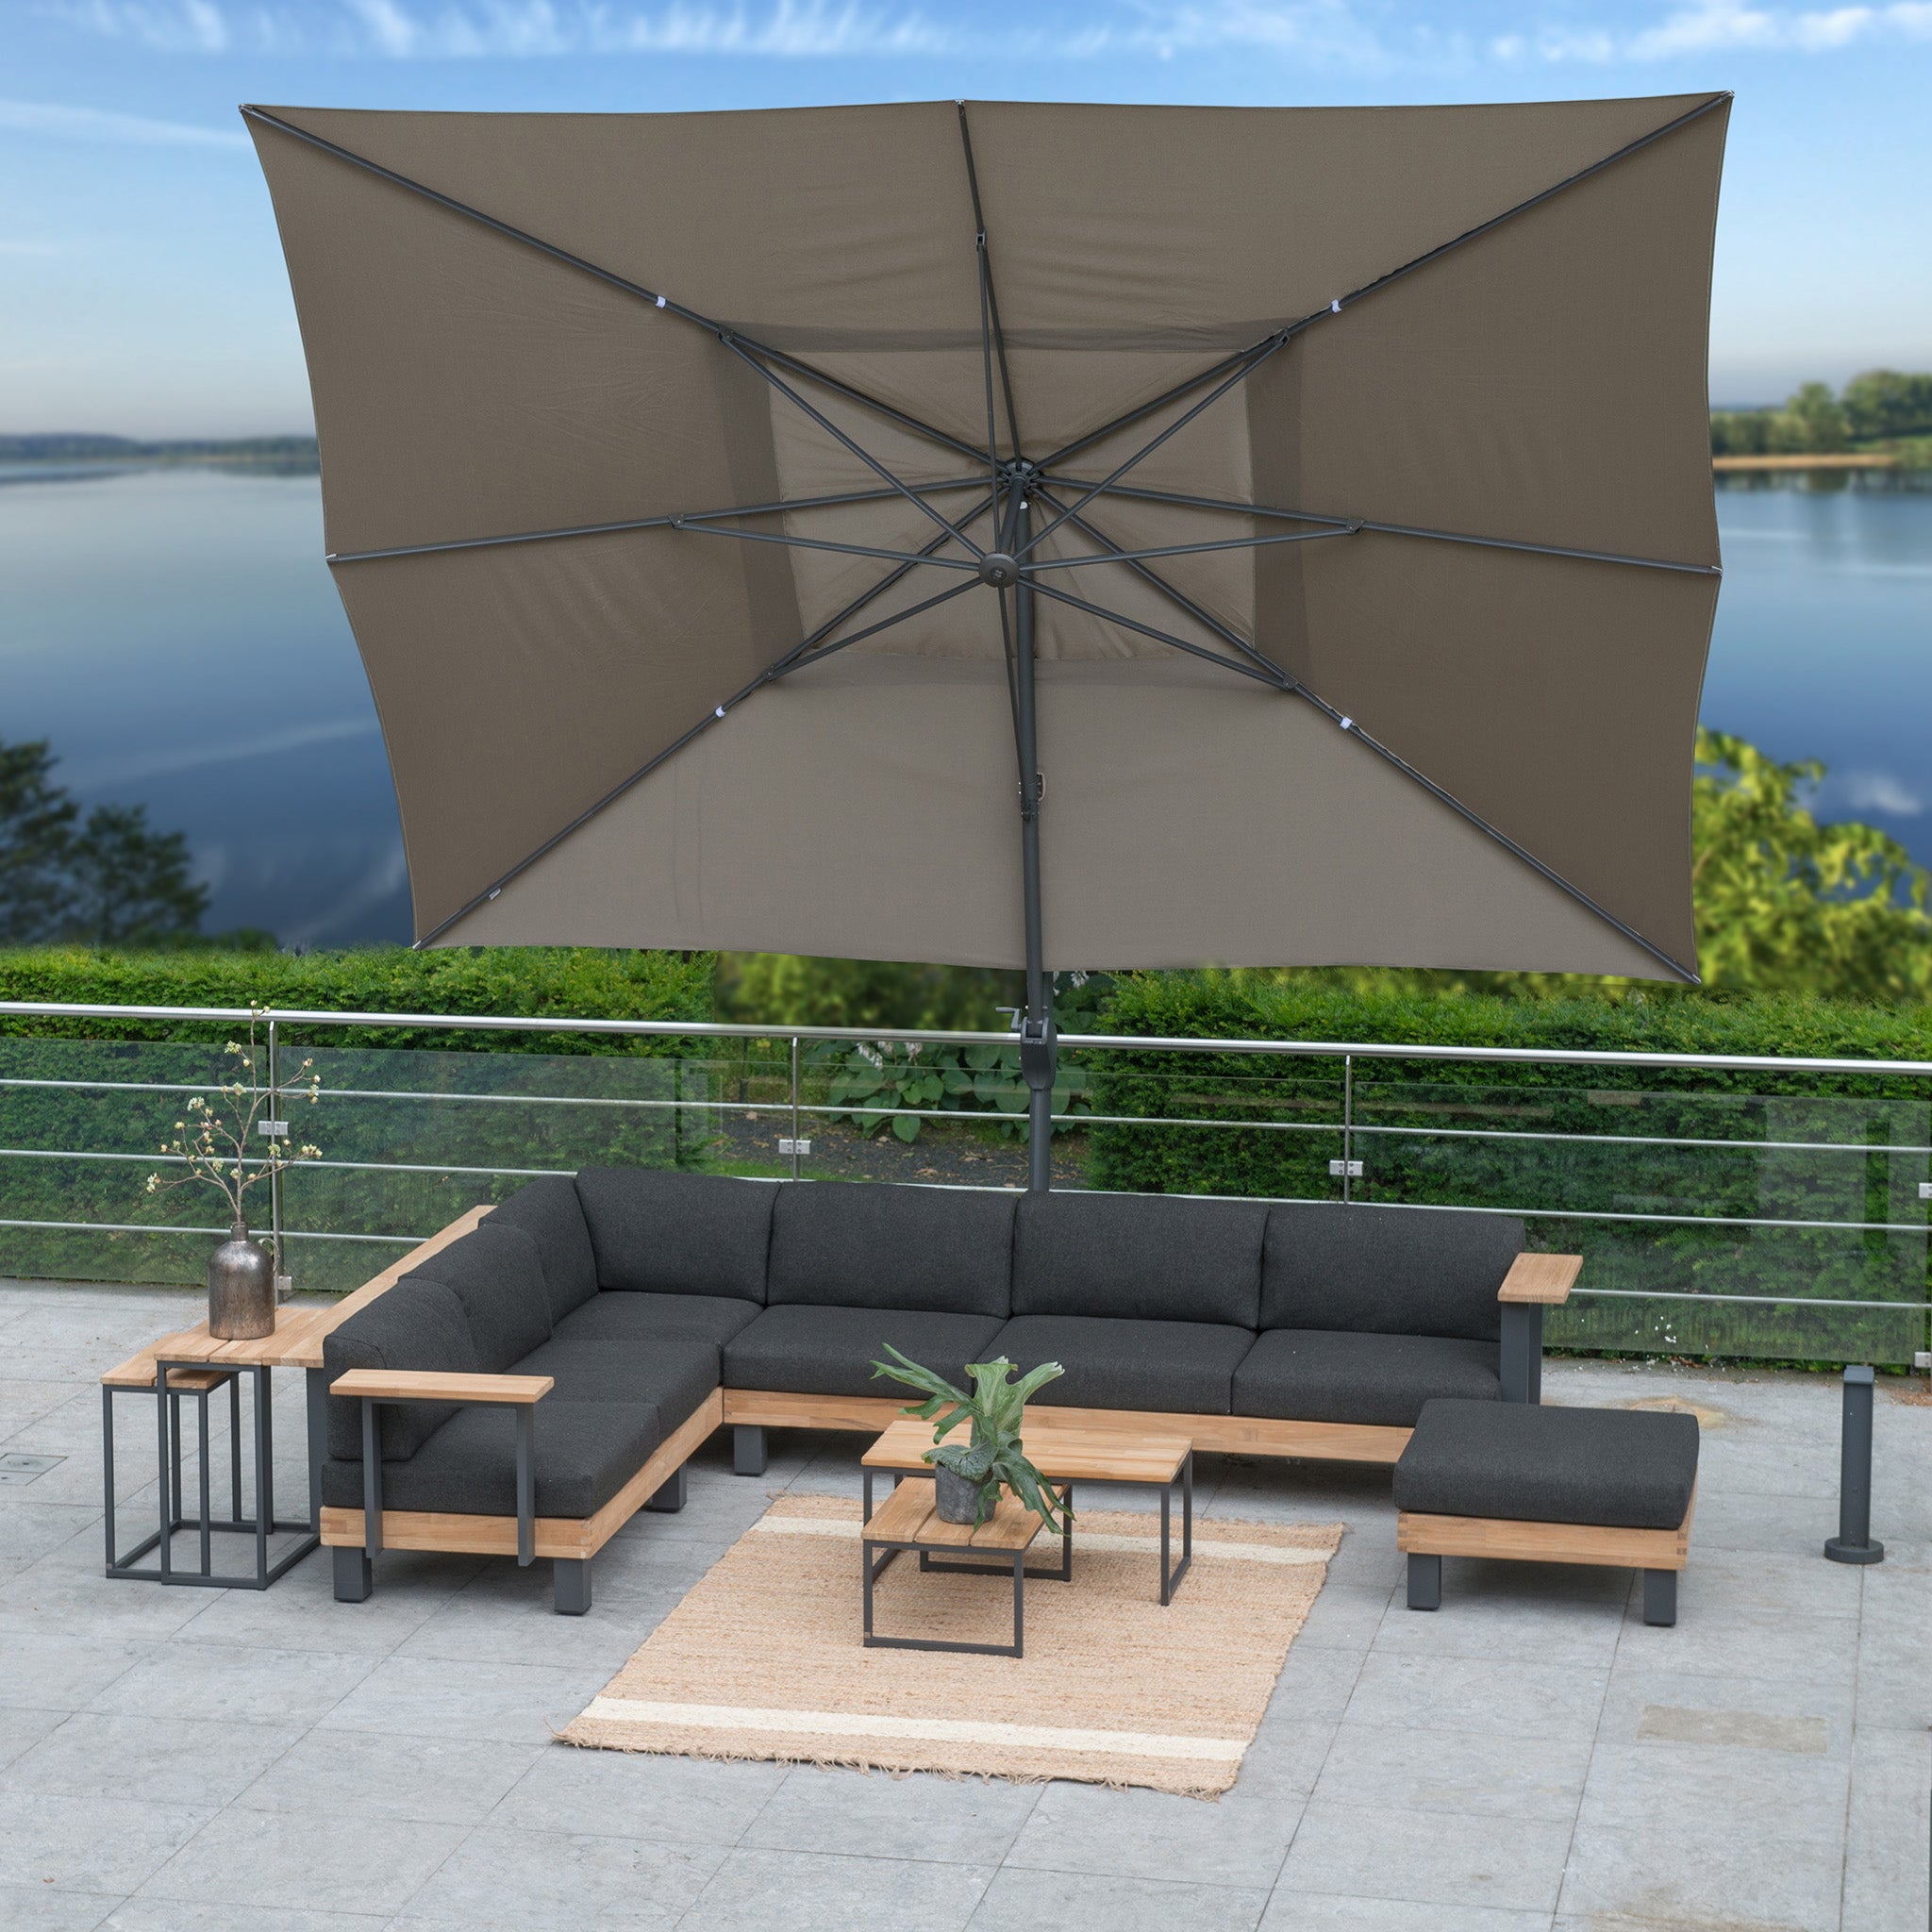 Hacienda 3m x 4m Cantilever Parasol With Granite Base & Cover in Taupe